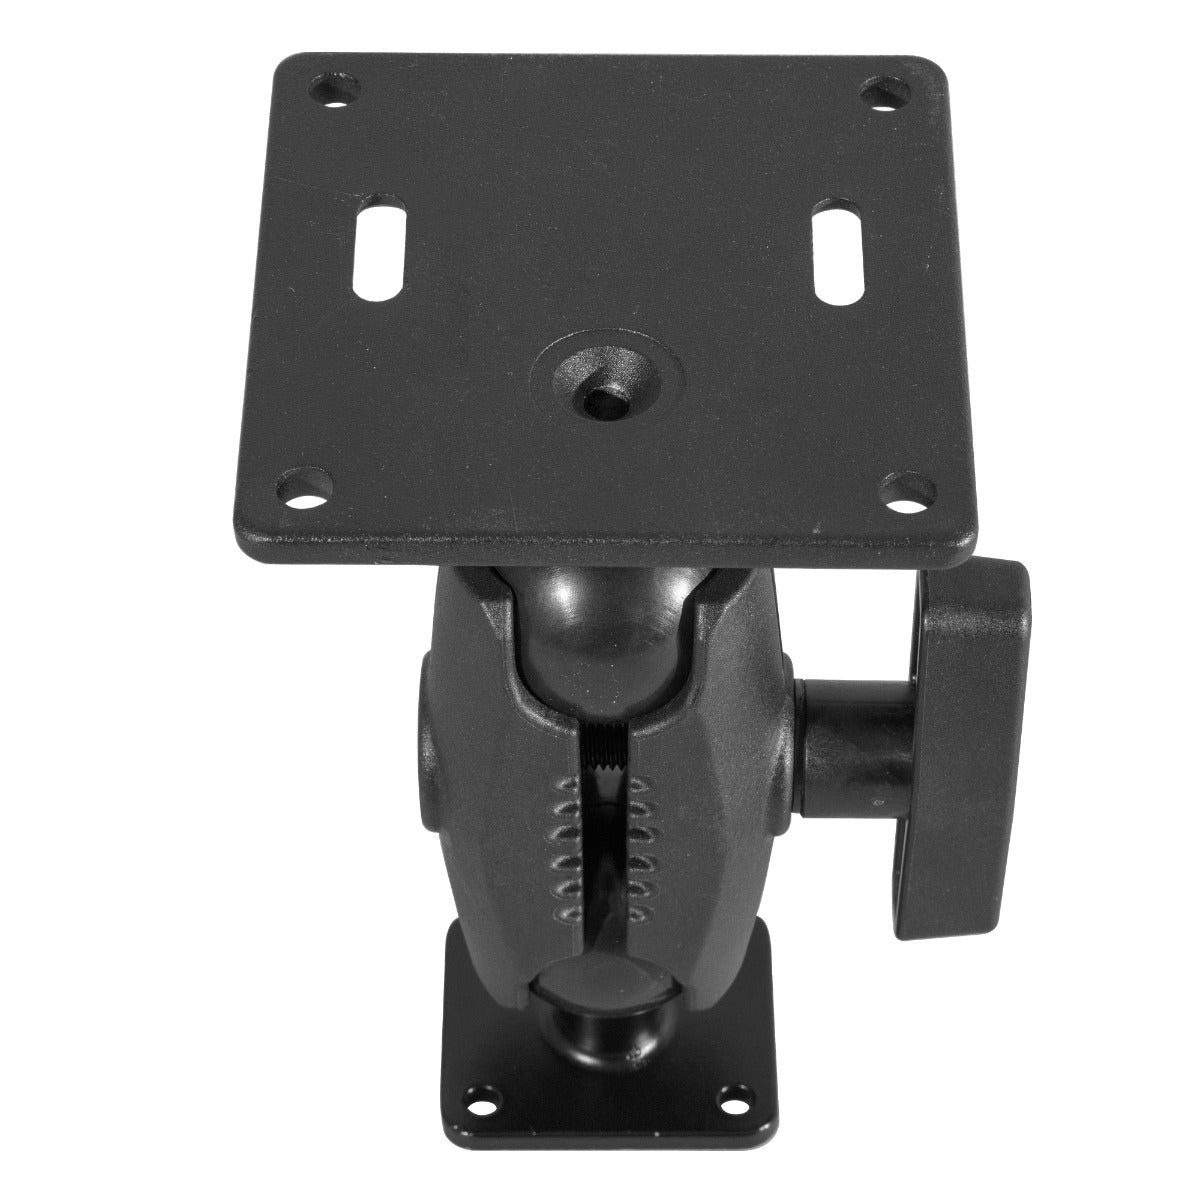 iBOLT™ 38mm / 1.5 inch Metal AMPS Pattern to VESA 75 x 75 Mount for Monitors, displays, or tv’s